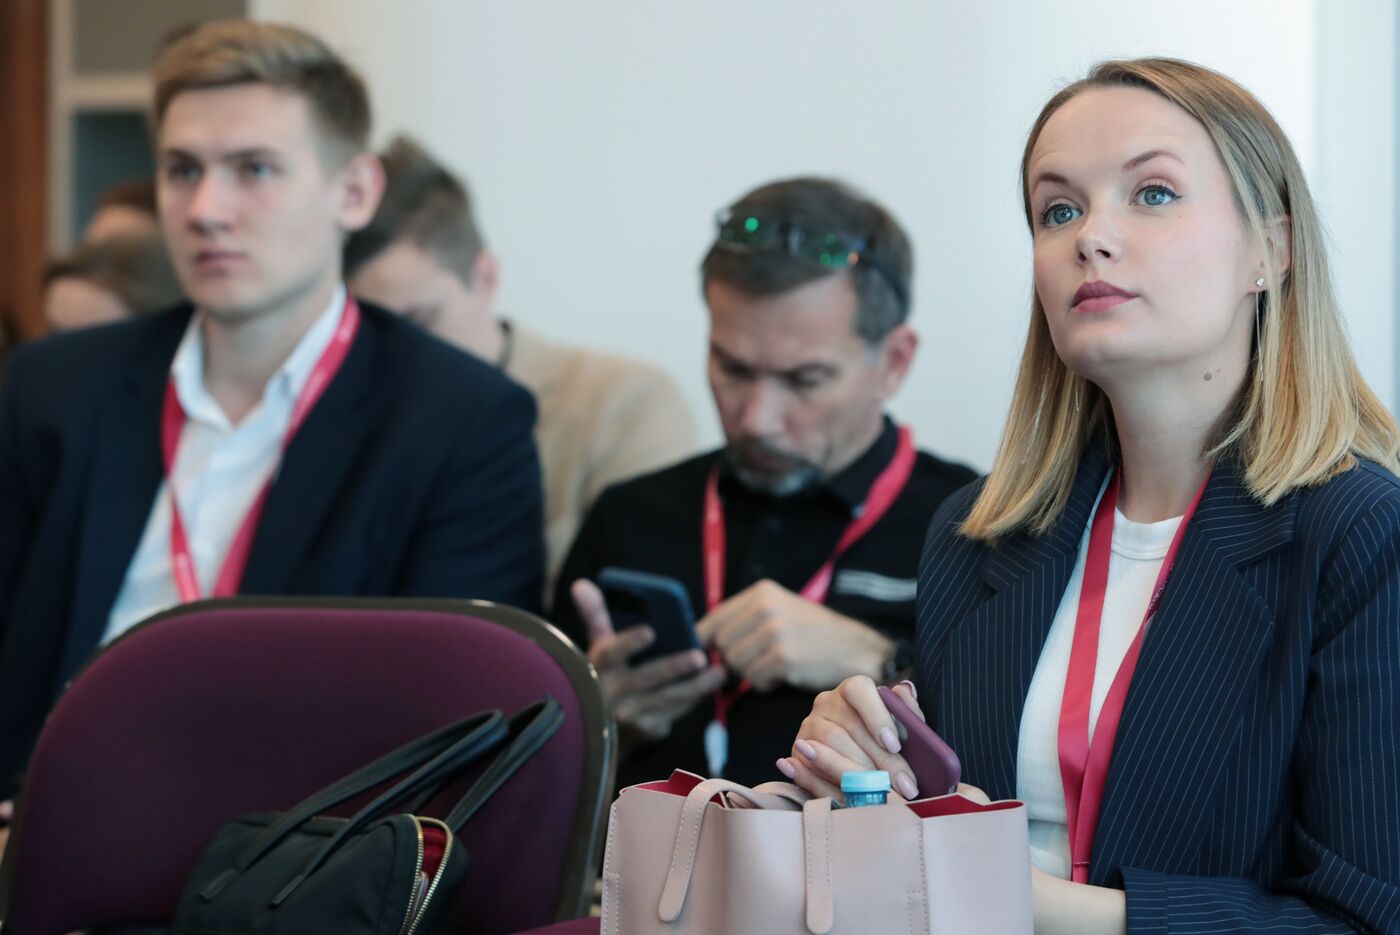 SPIEF-2023. Start-up as a Major: Showcasing Student Start-up Projects